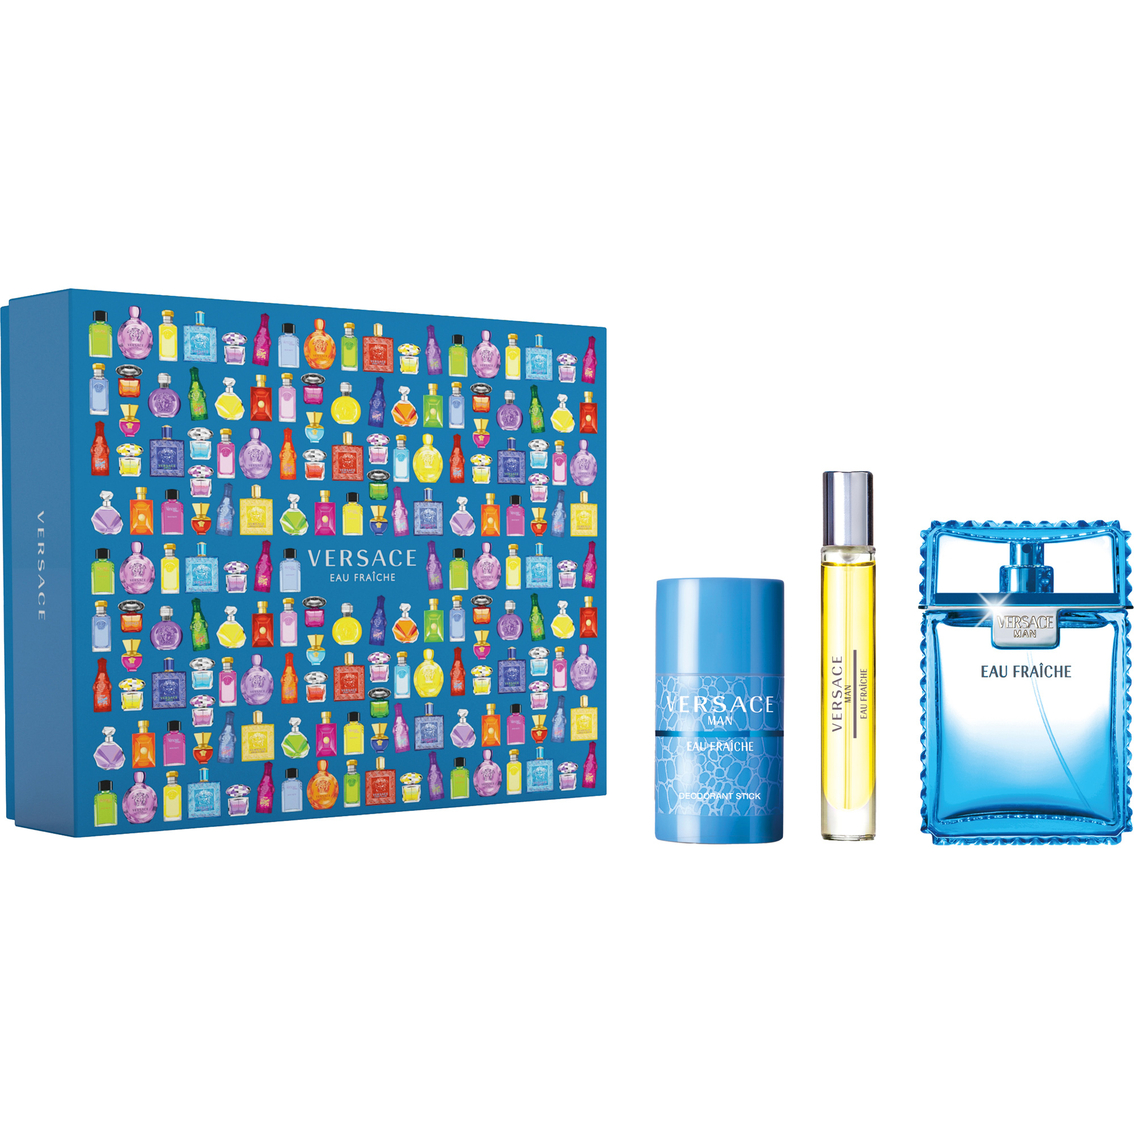 Versace Eau Fraiche 3 Pc. Gift Set | Gifts Sets For Him | Mother's Day ...